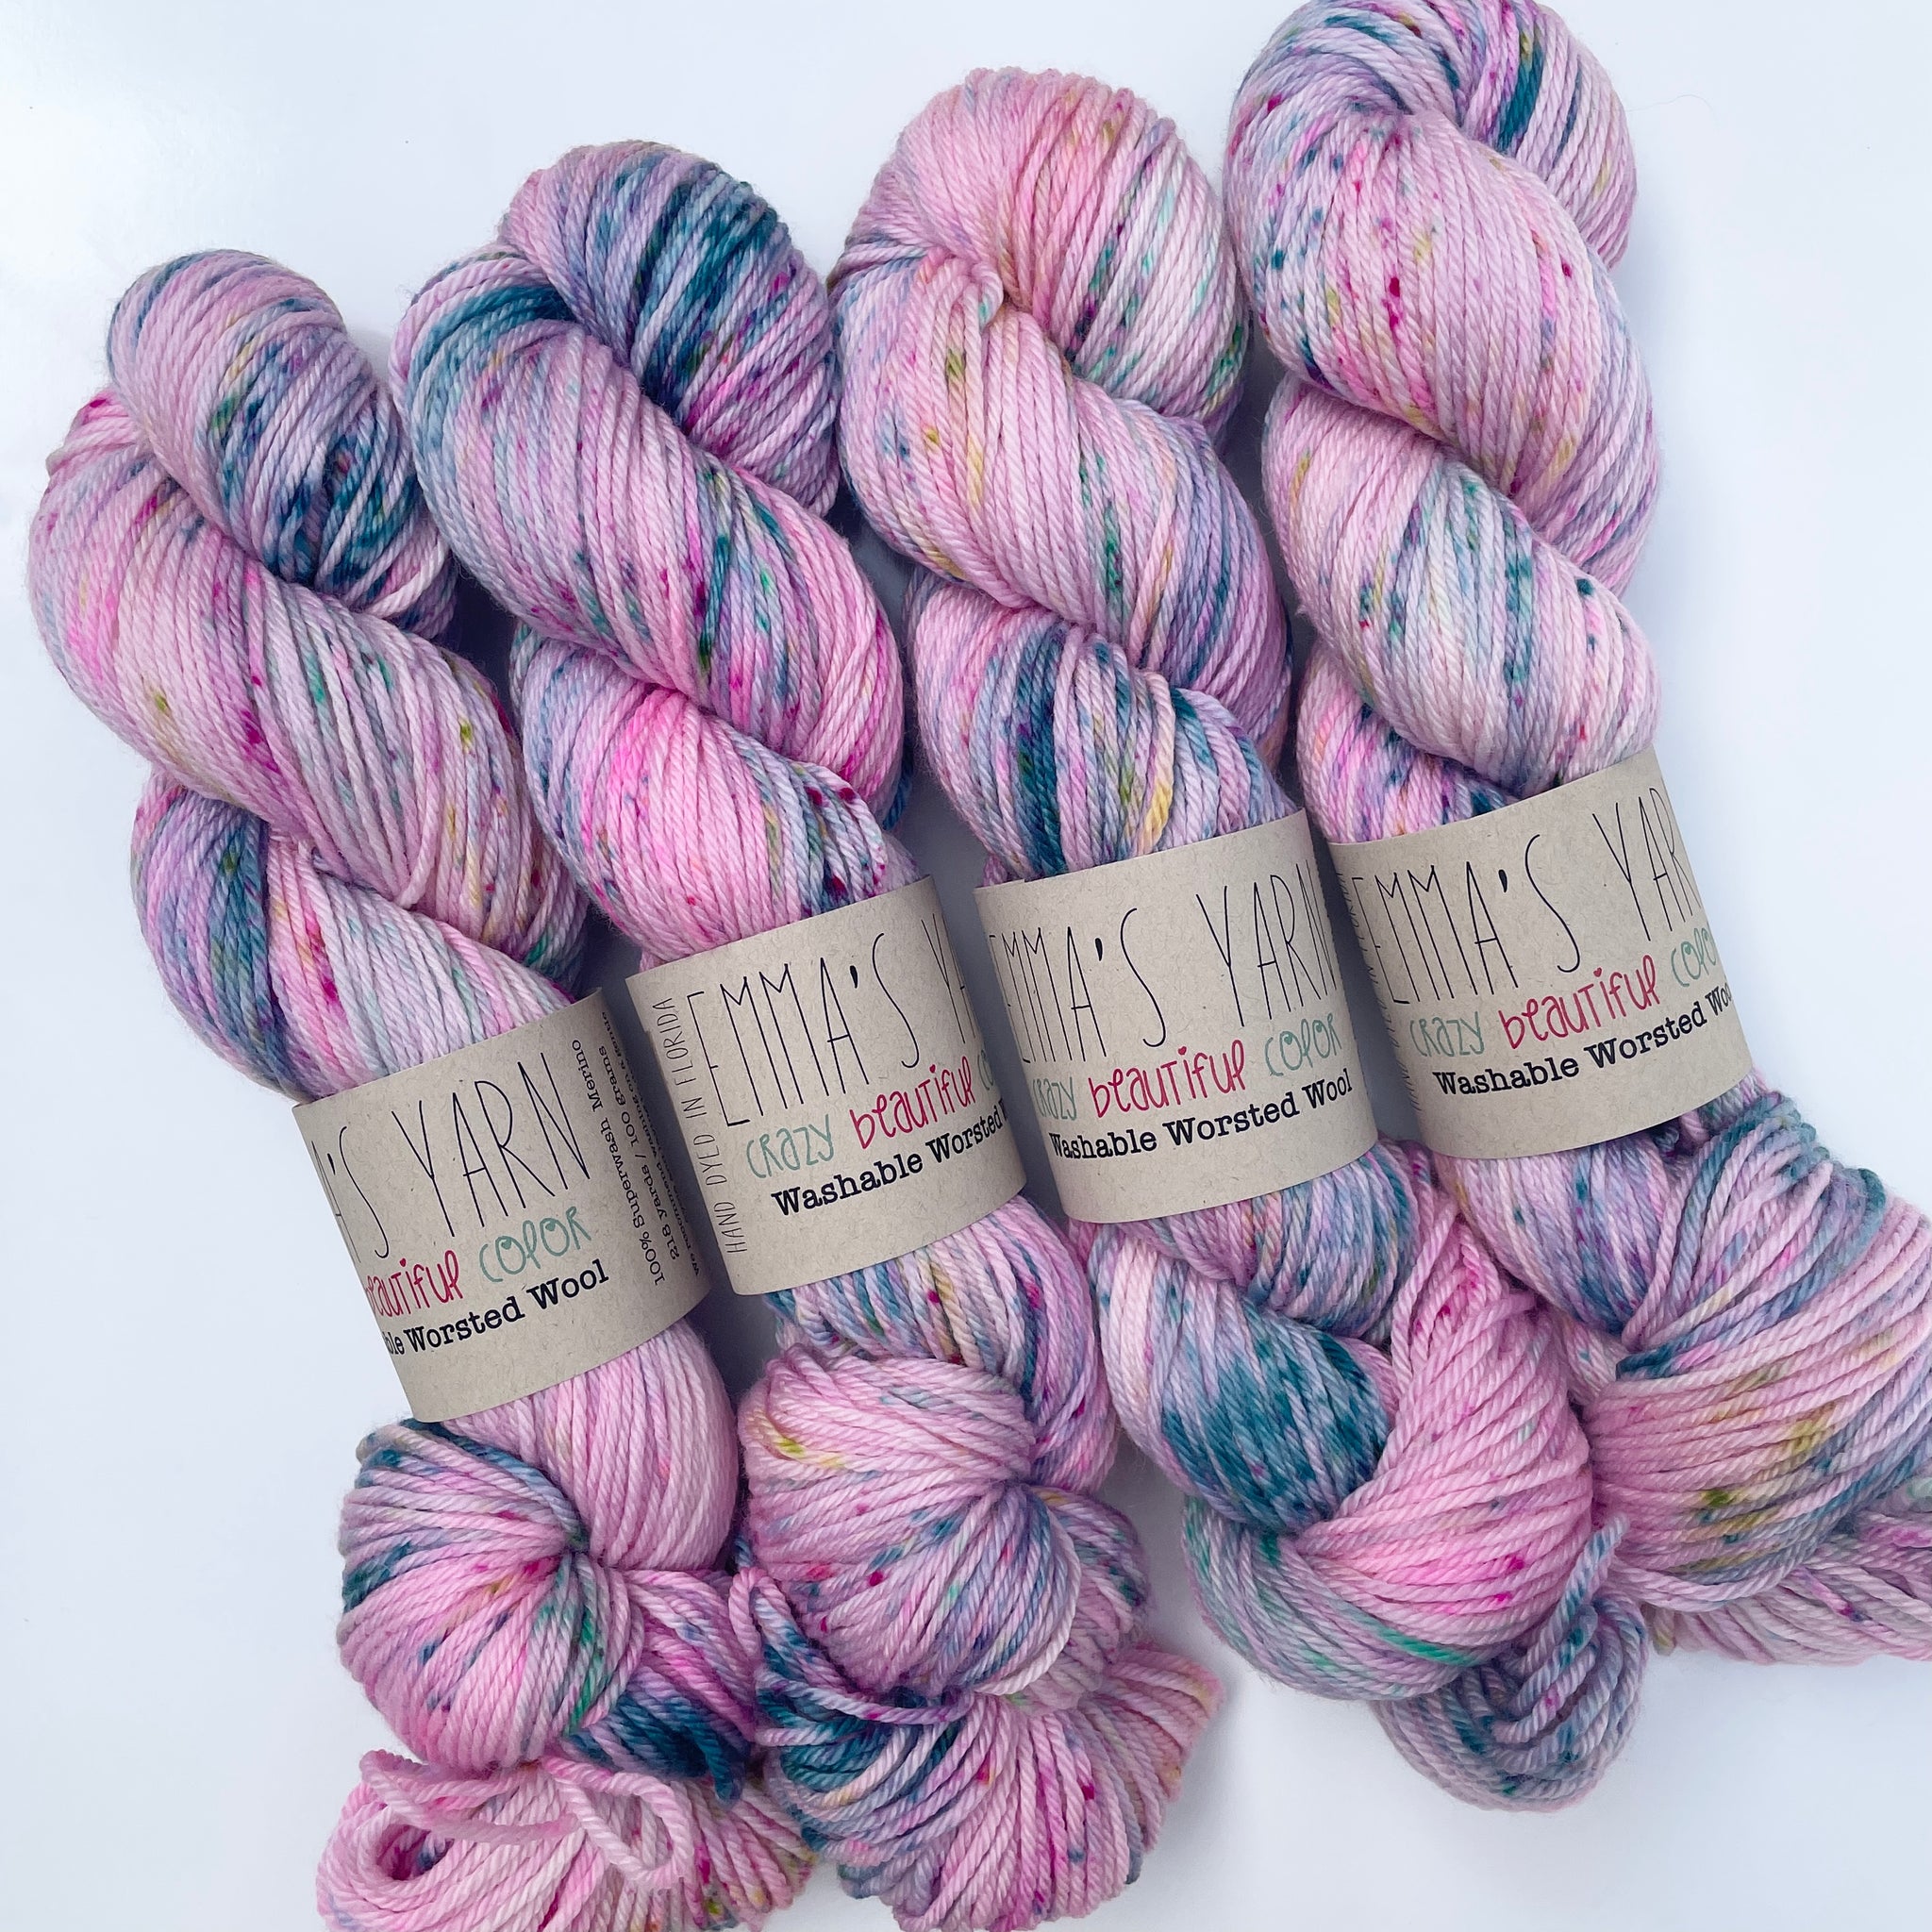 Life Of The Party - Washable Worsted Wool